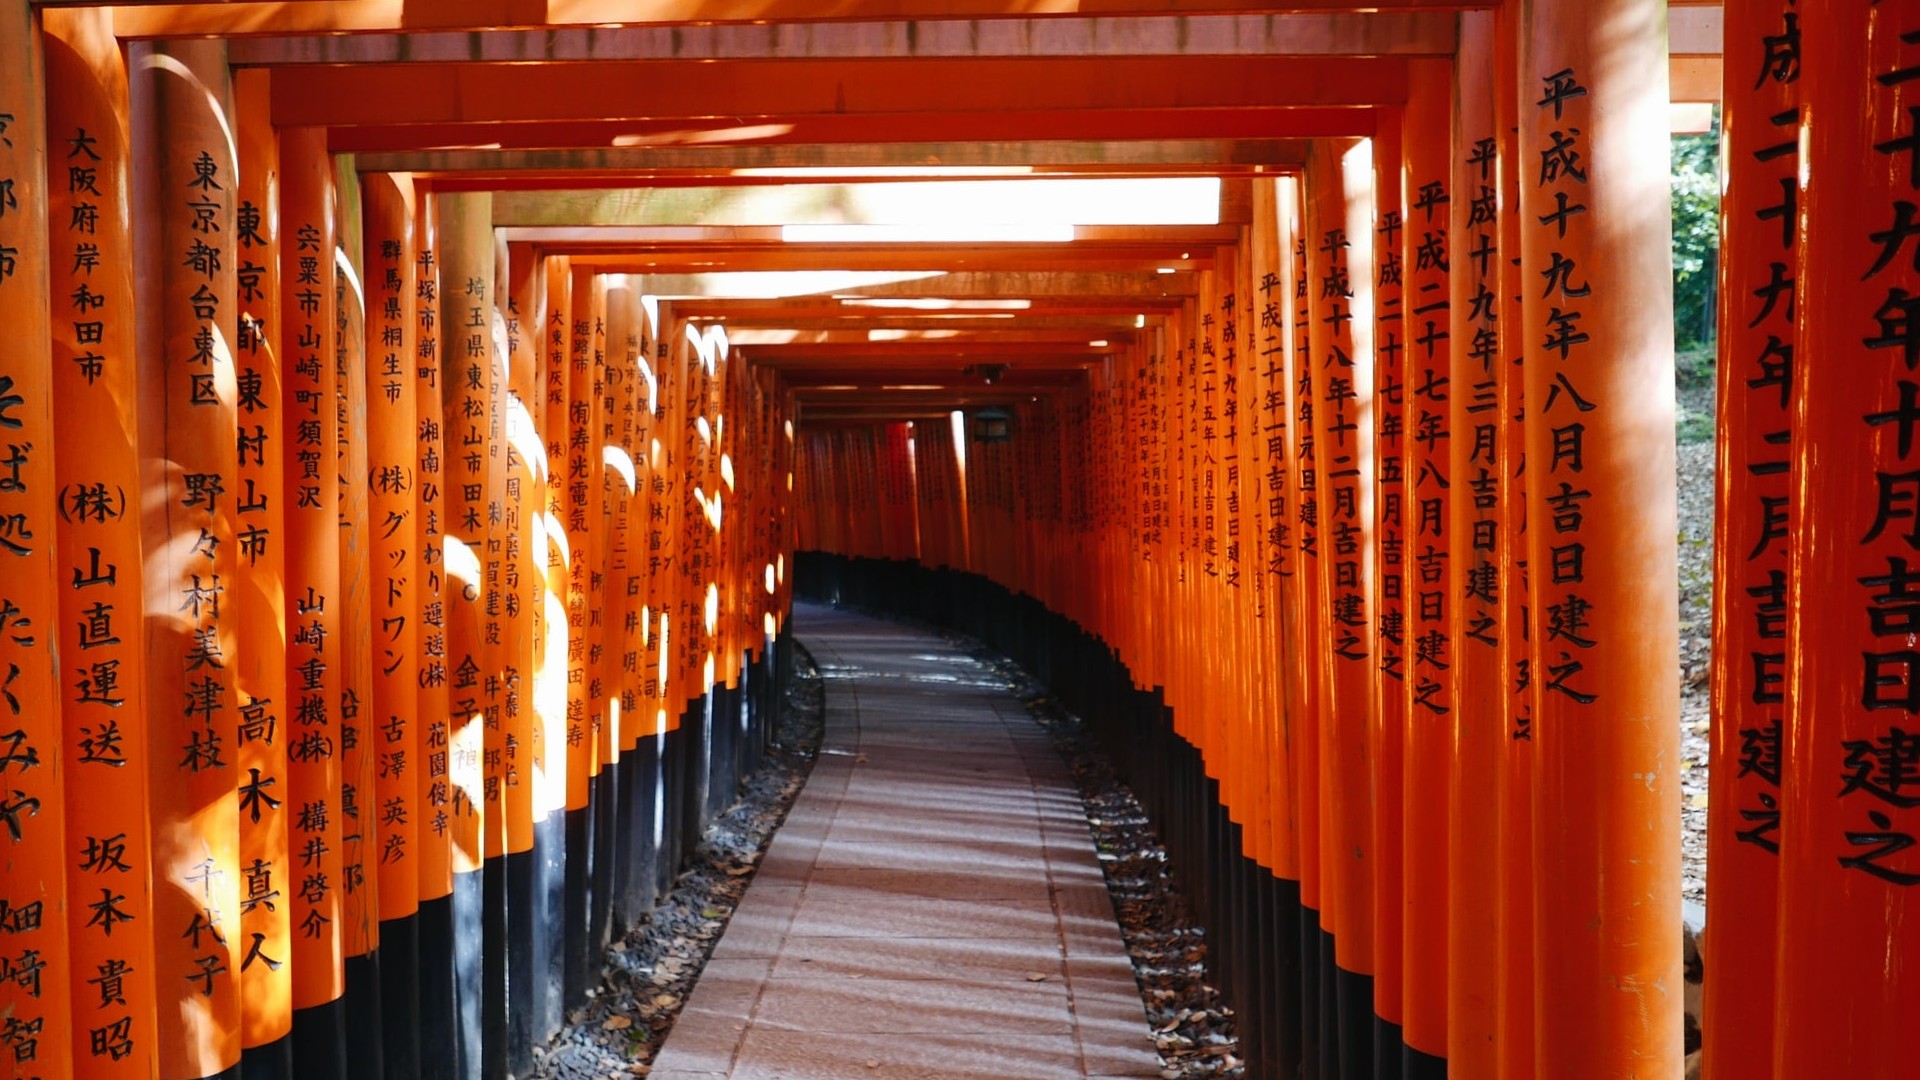 A corridor with red pillars and Japanese writing